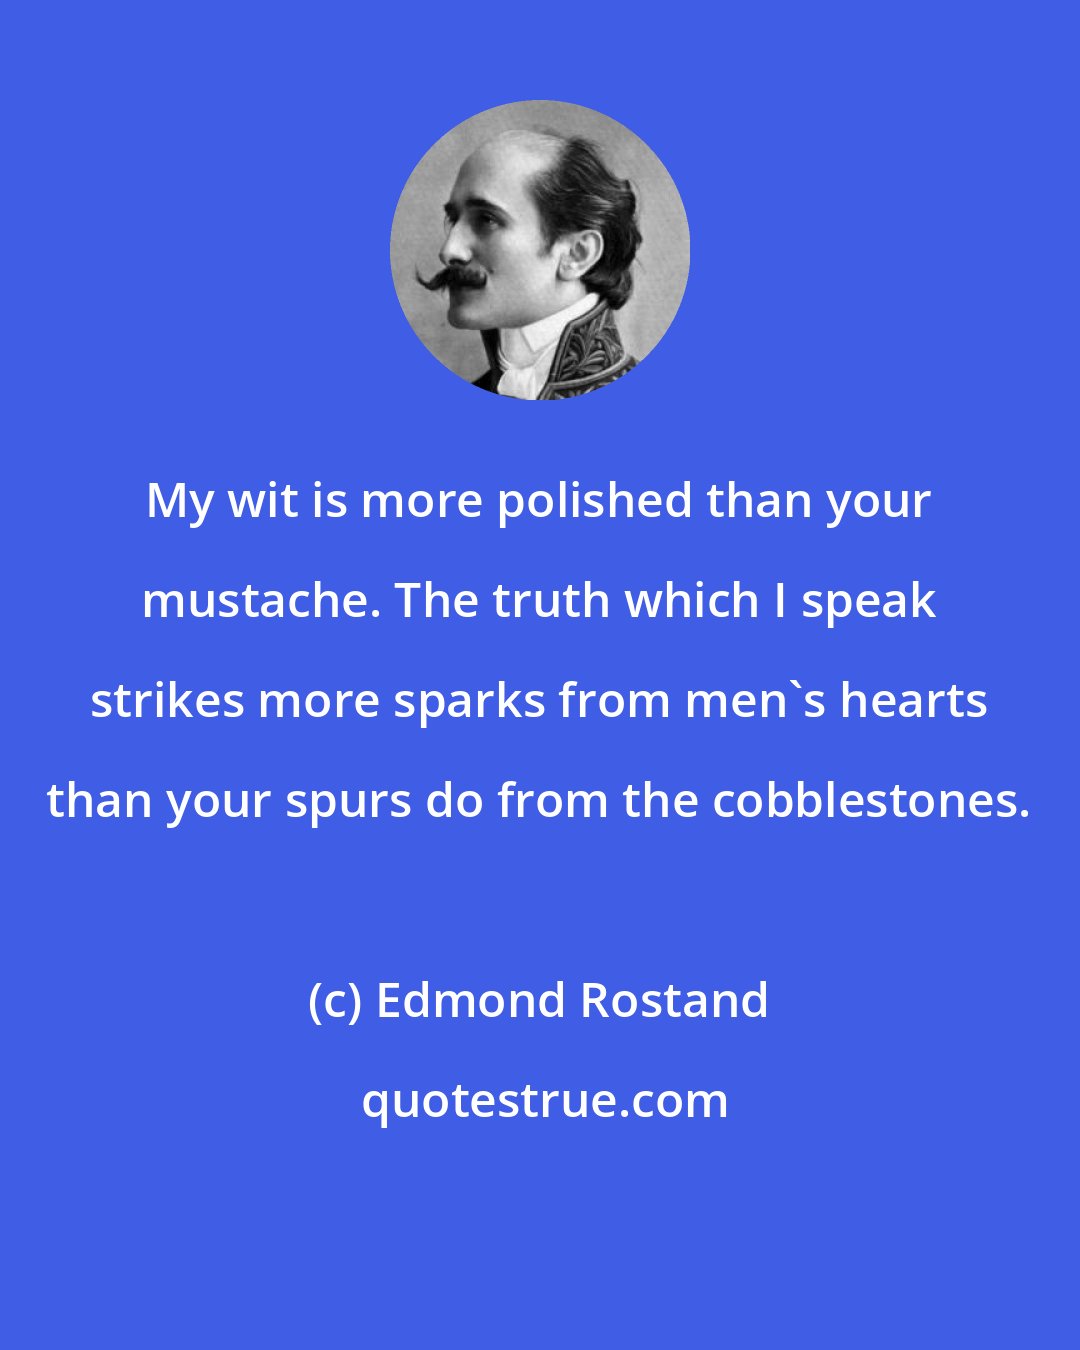 Edmond Rostand: My wit is more polished than your mustache. The truth which I speak strikes more sparks from men's hearts than your spurs do from the cobblestones.